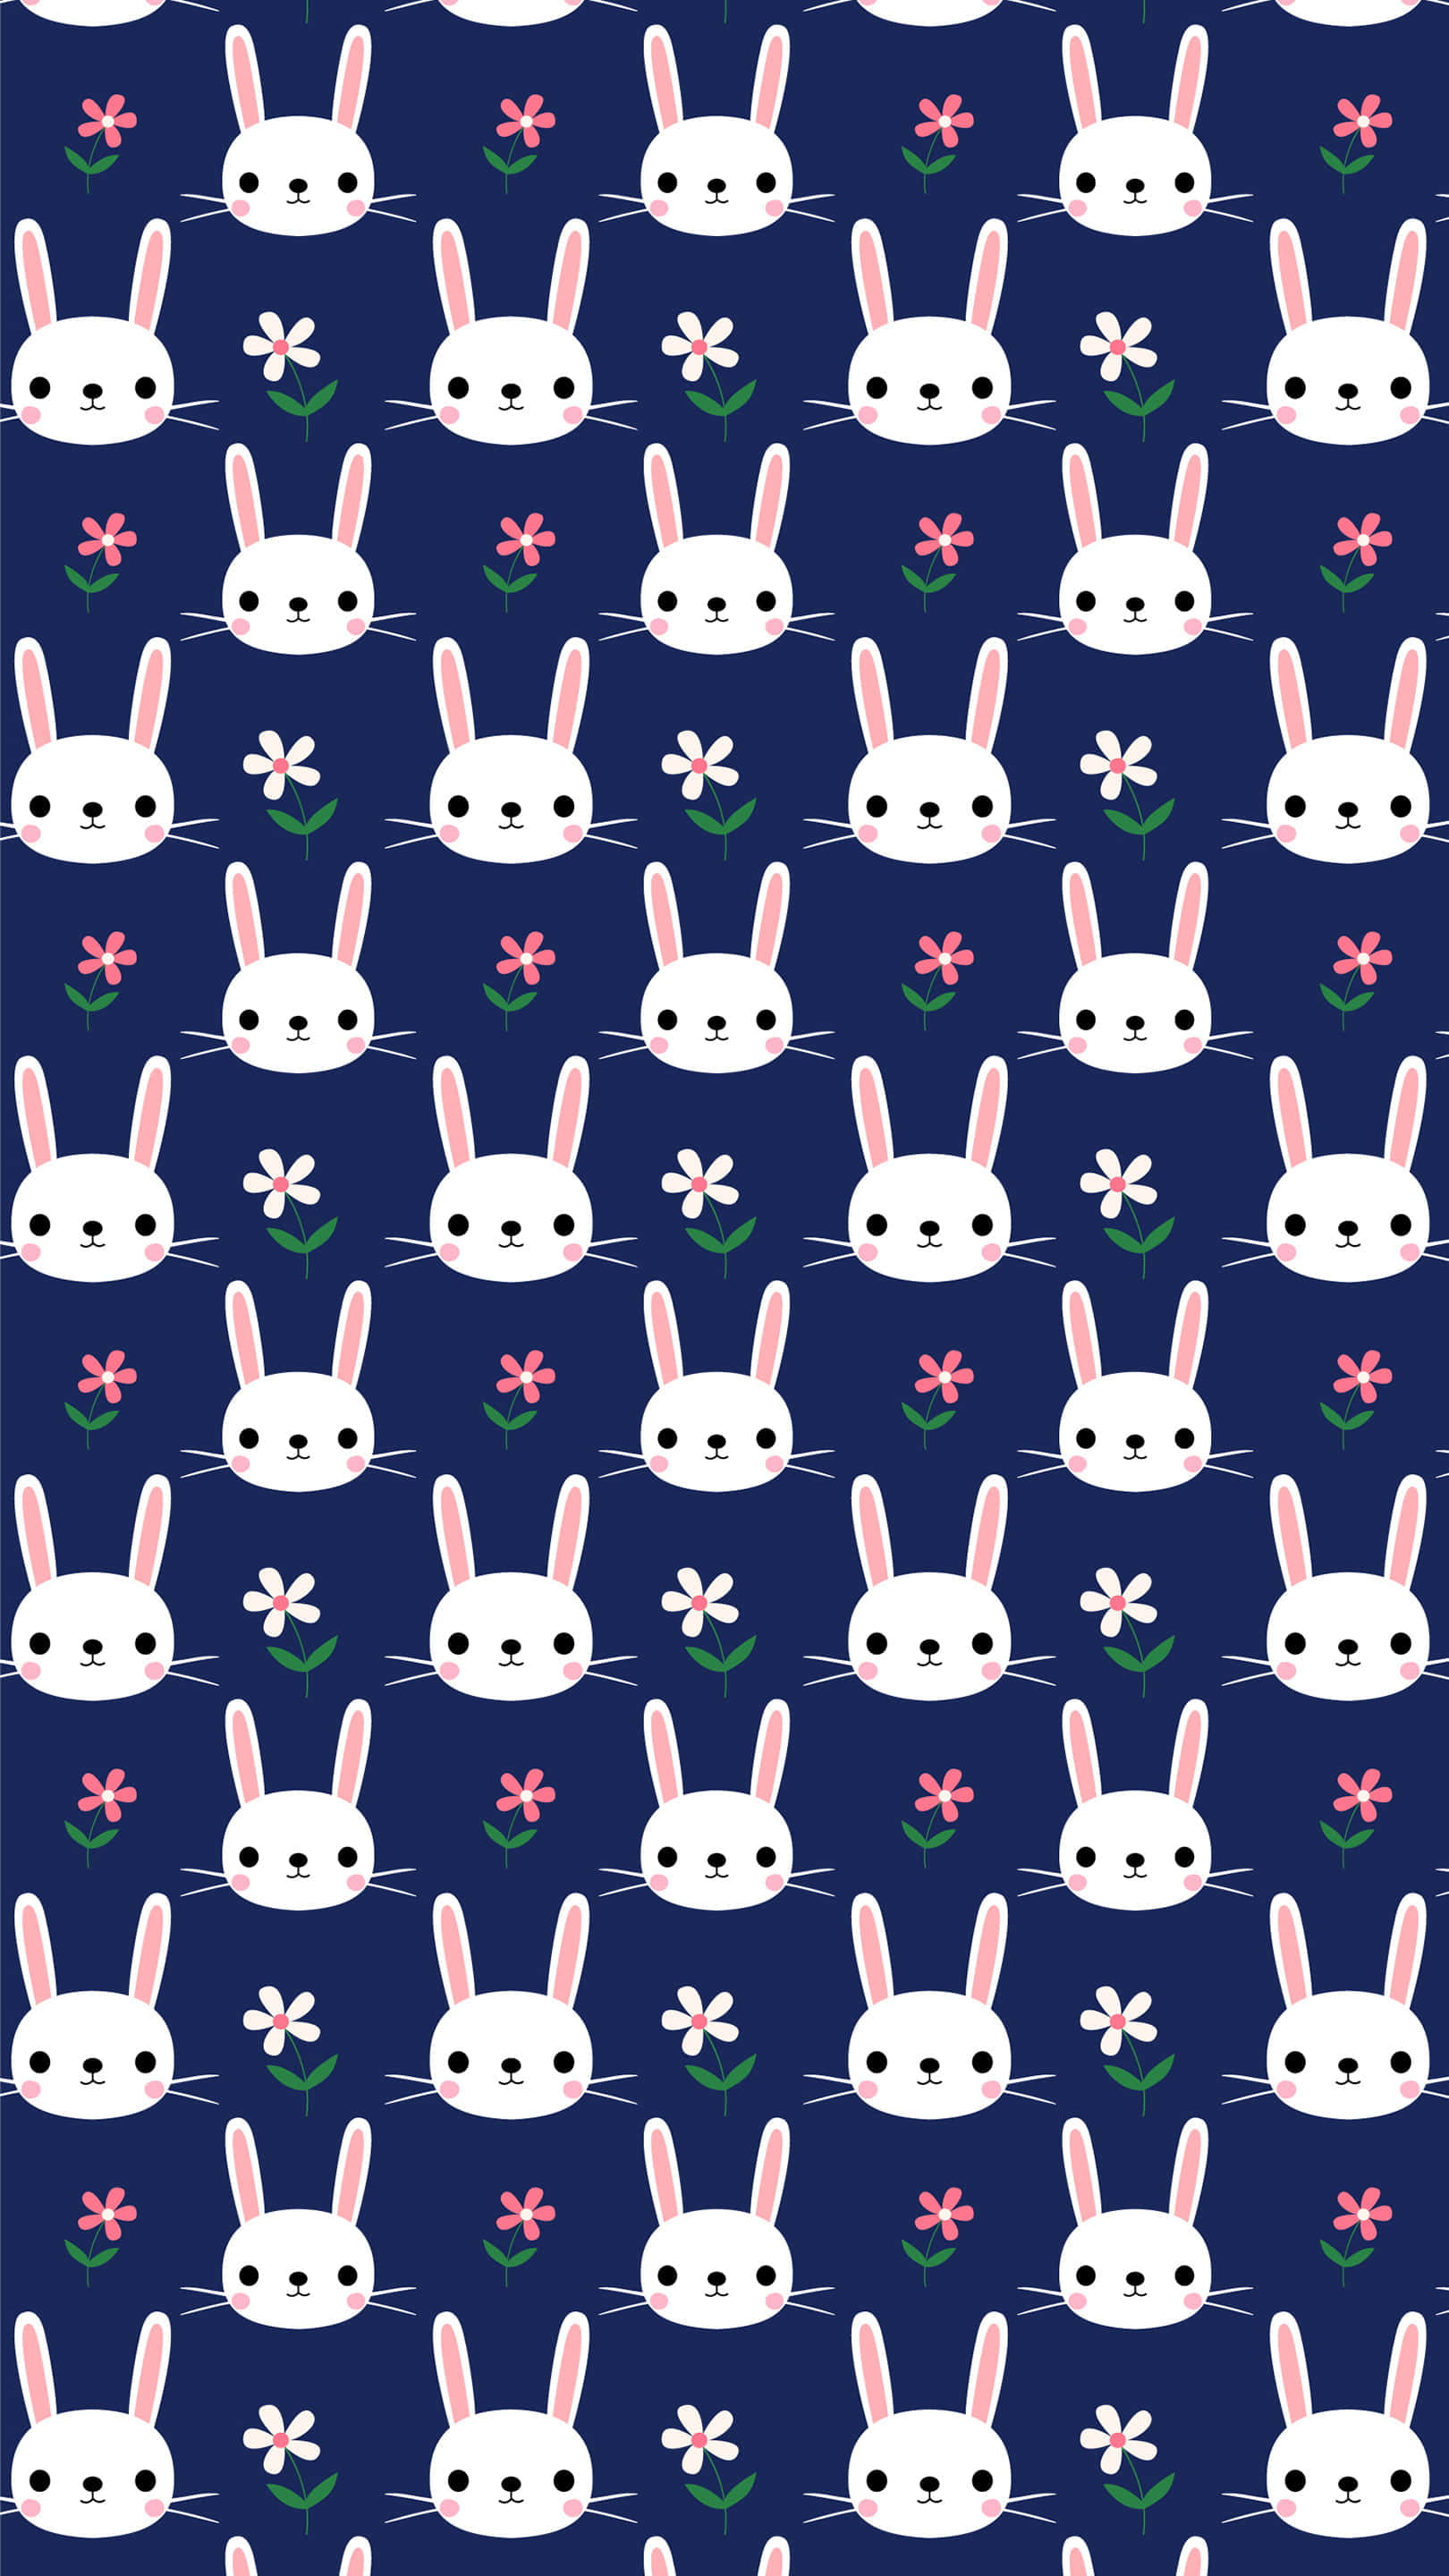 Bring a smile to someone's day with this Kawaii Bunny wallpaper!" Wallpaper